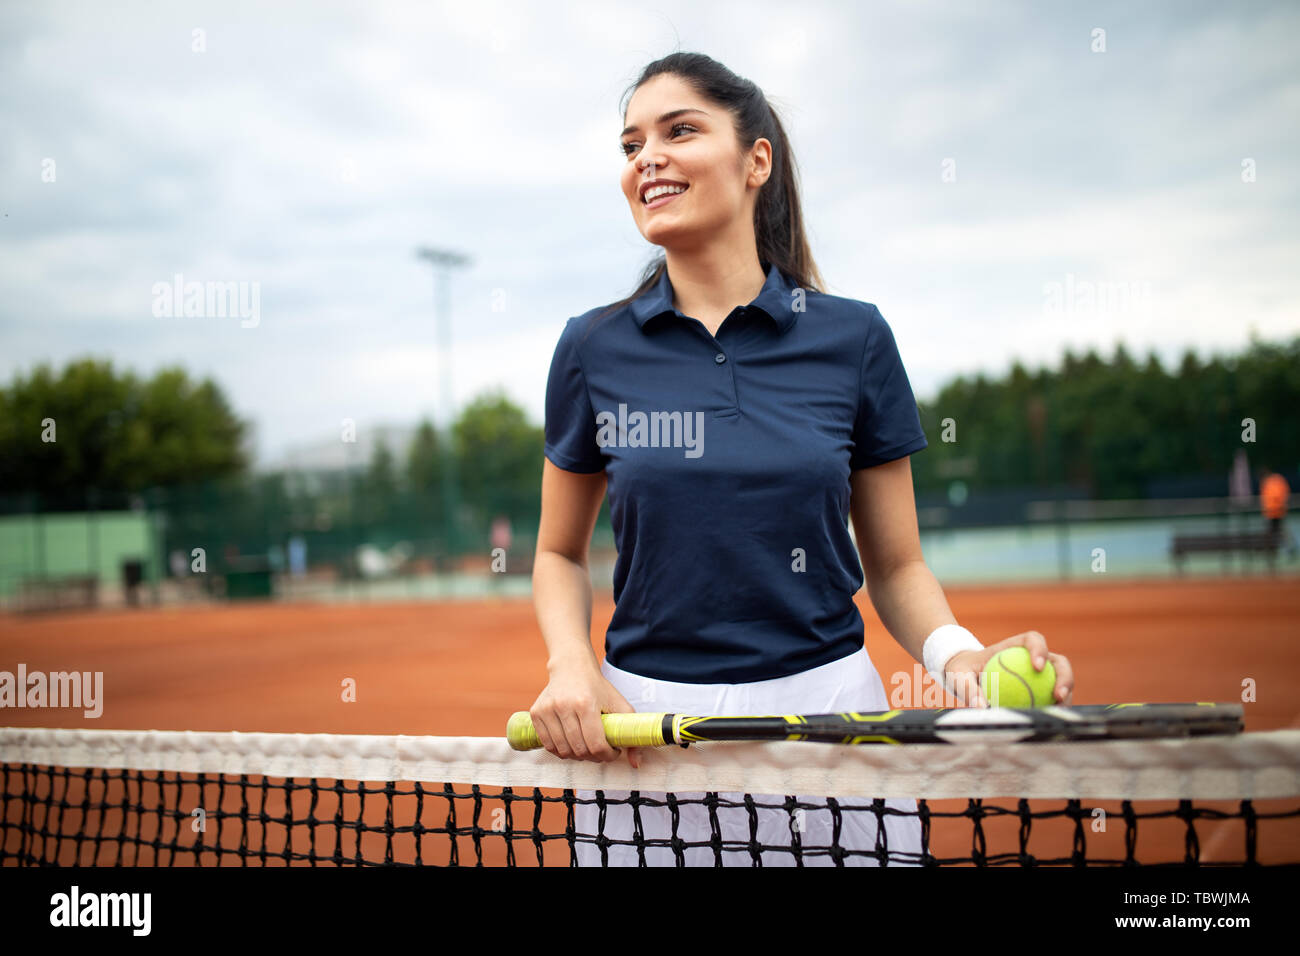 Portrait of forceful woman playing tennis on outdoor tennis court Stock Photo